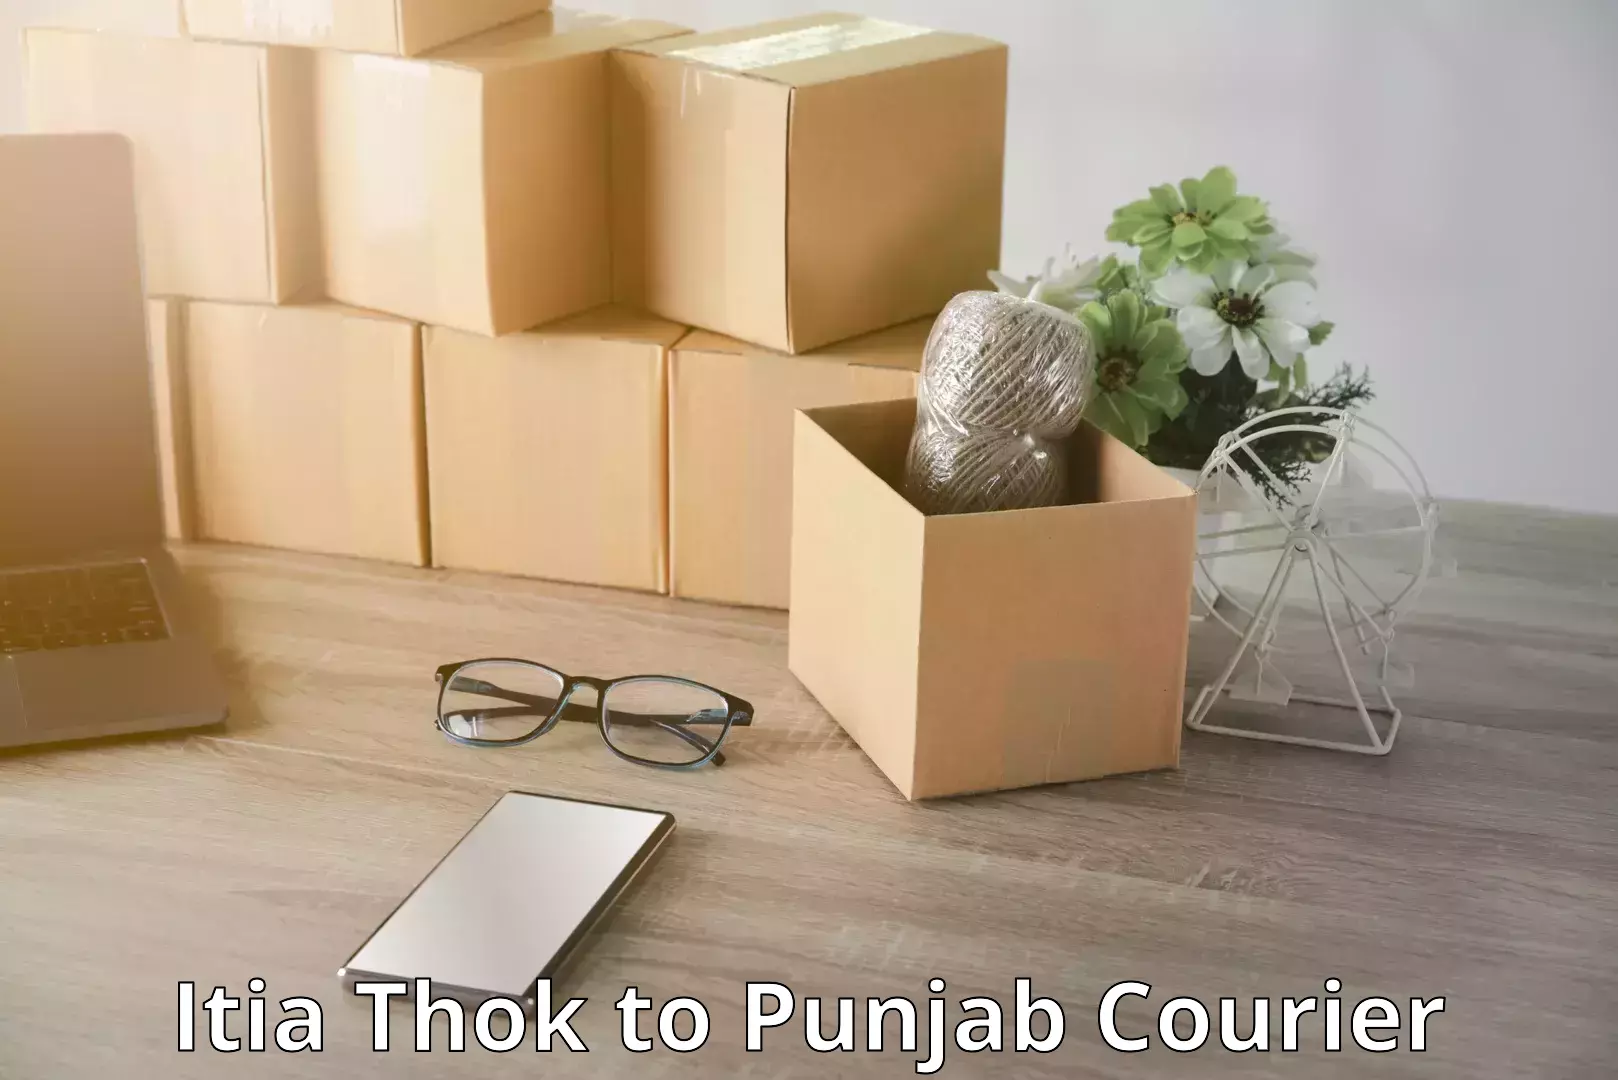 Baggage delivery management Itia Thok to Punjab